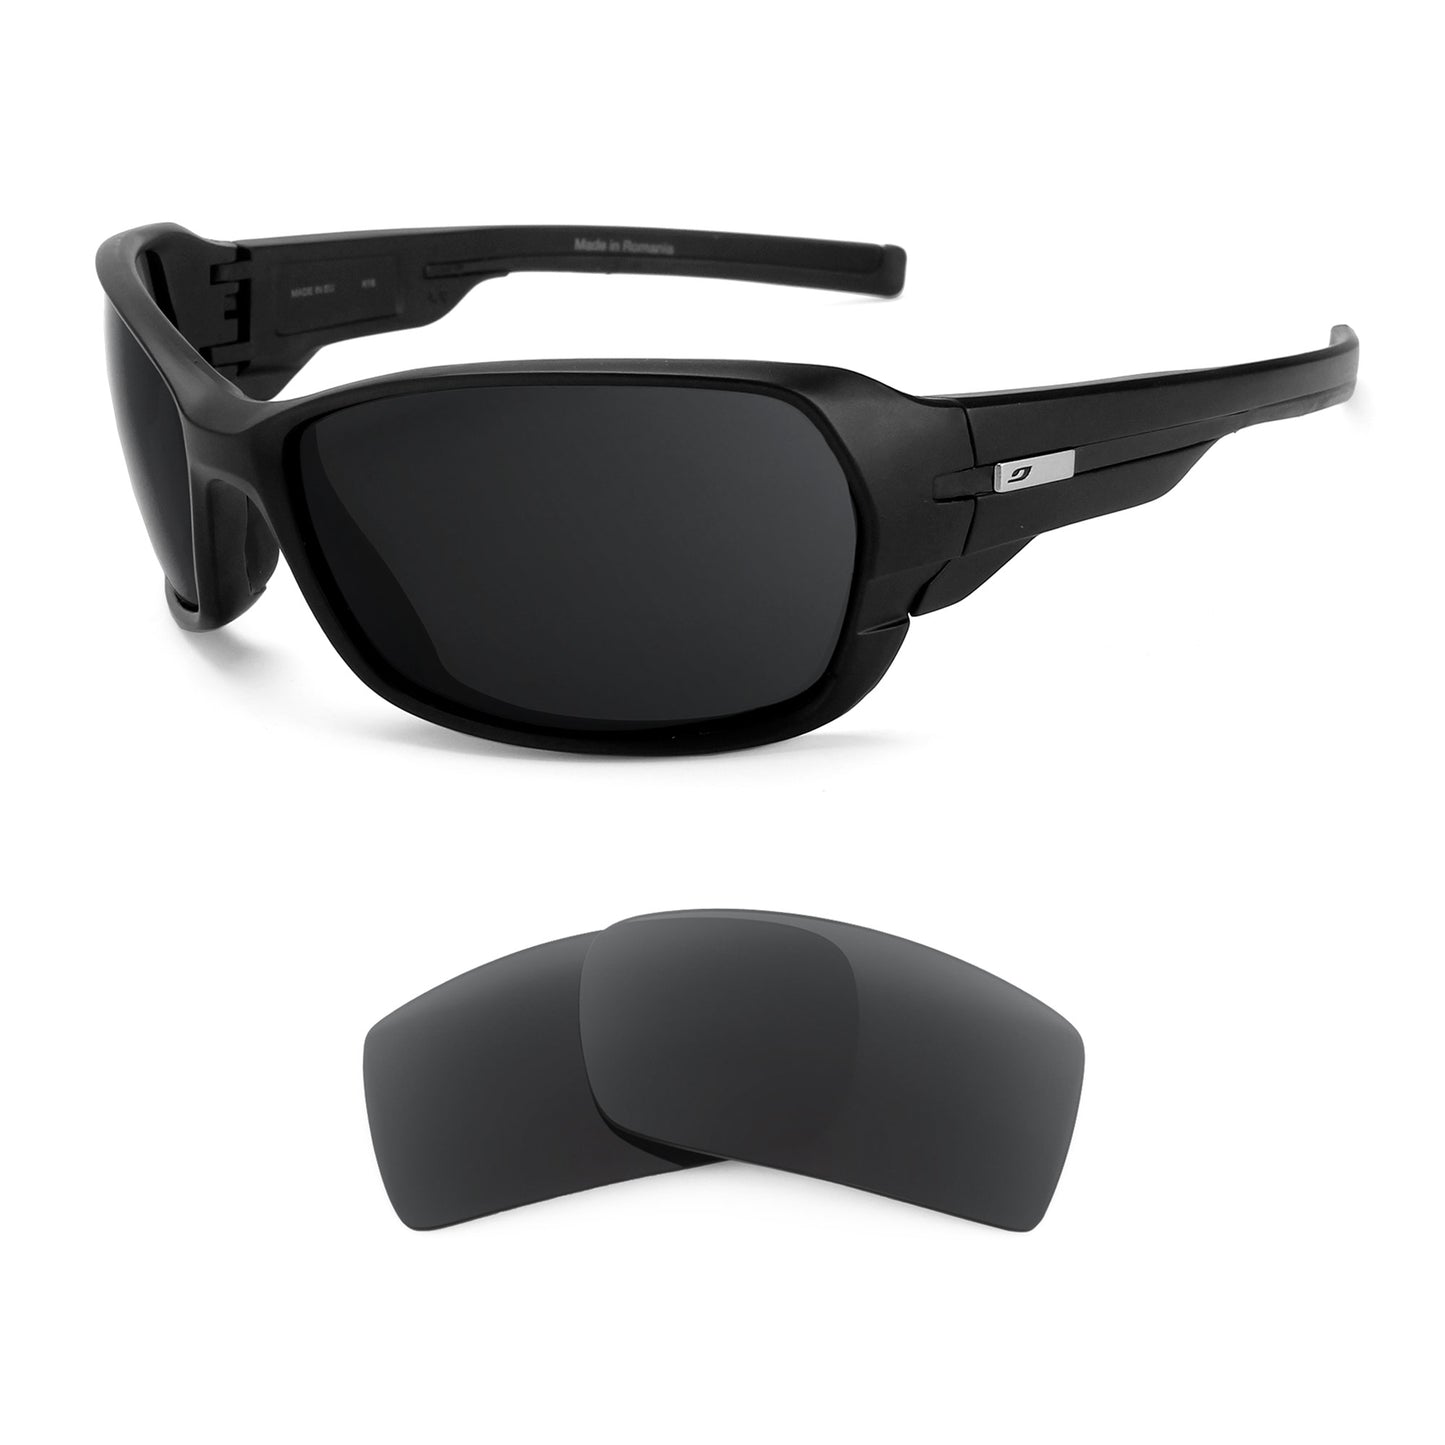 Julbo Dirt 2.0 sunglasses with replacement lenses